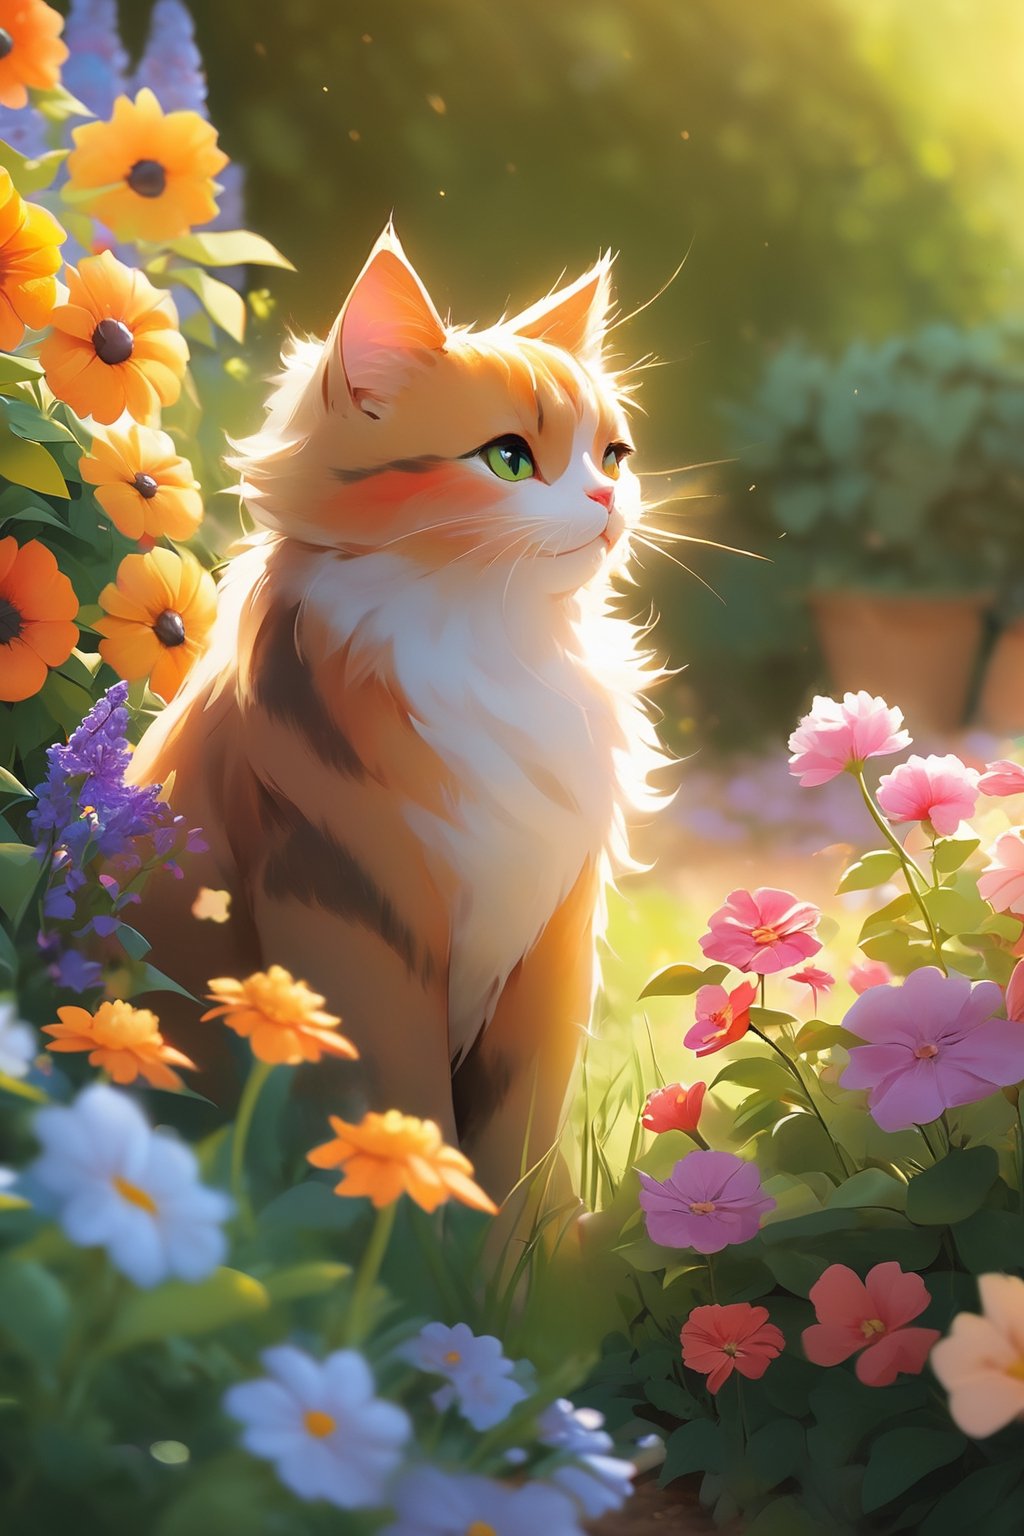 a beautiful flower garden, A garden filled with a vibrant display of colorful flowers. The sun is gently warming the scene, and there's a soft breeze rustling through the petals. 1,Xxmix_Catecat